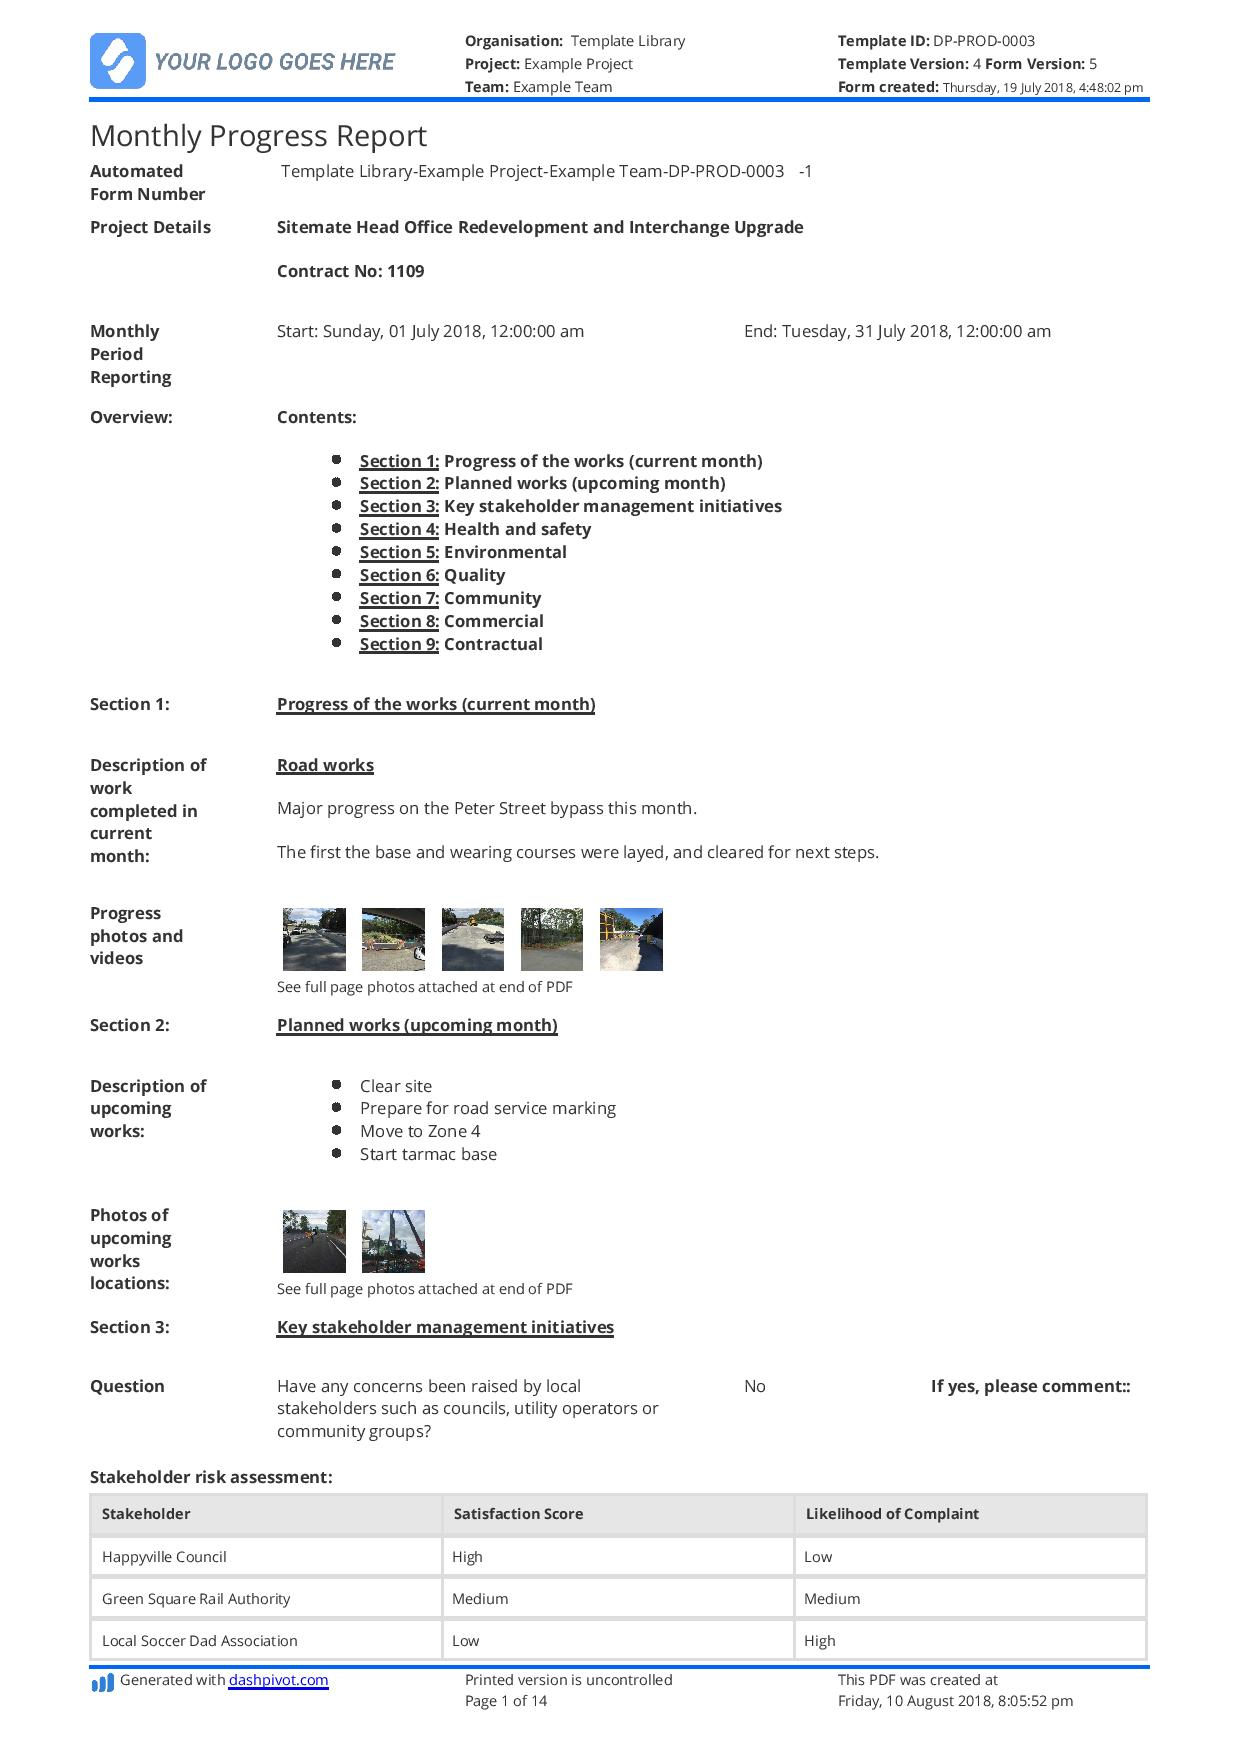 Monthly Construction Progress Report Template: Use This Pertaining To Engineering Progress Report Template